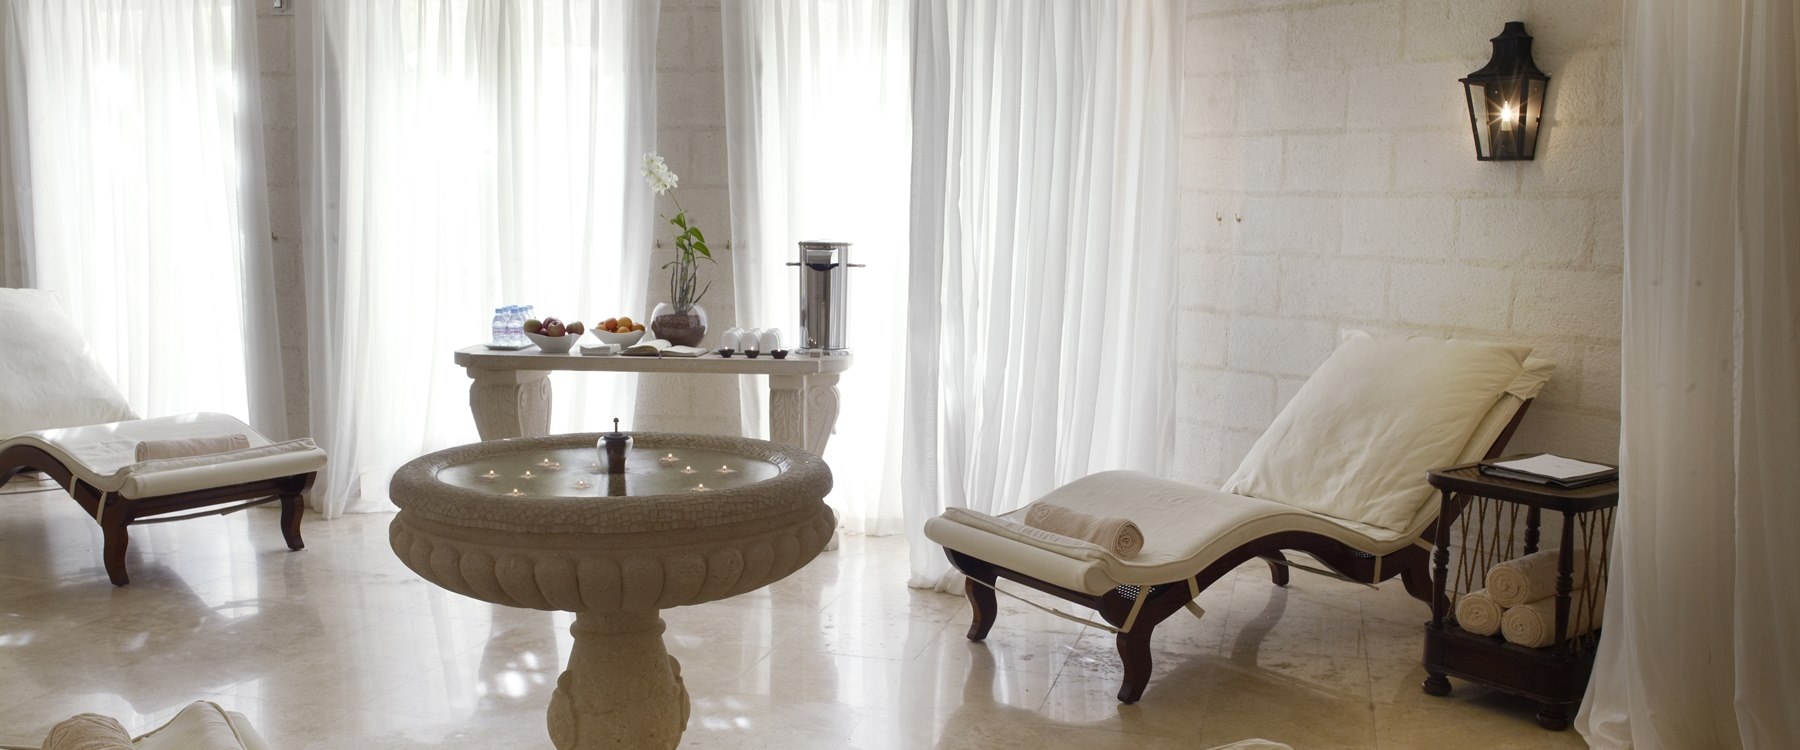 The relaxation room within the spa at Sandy Lane, Barbados